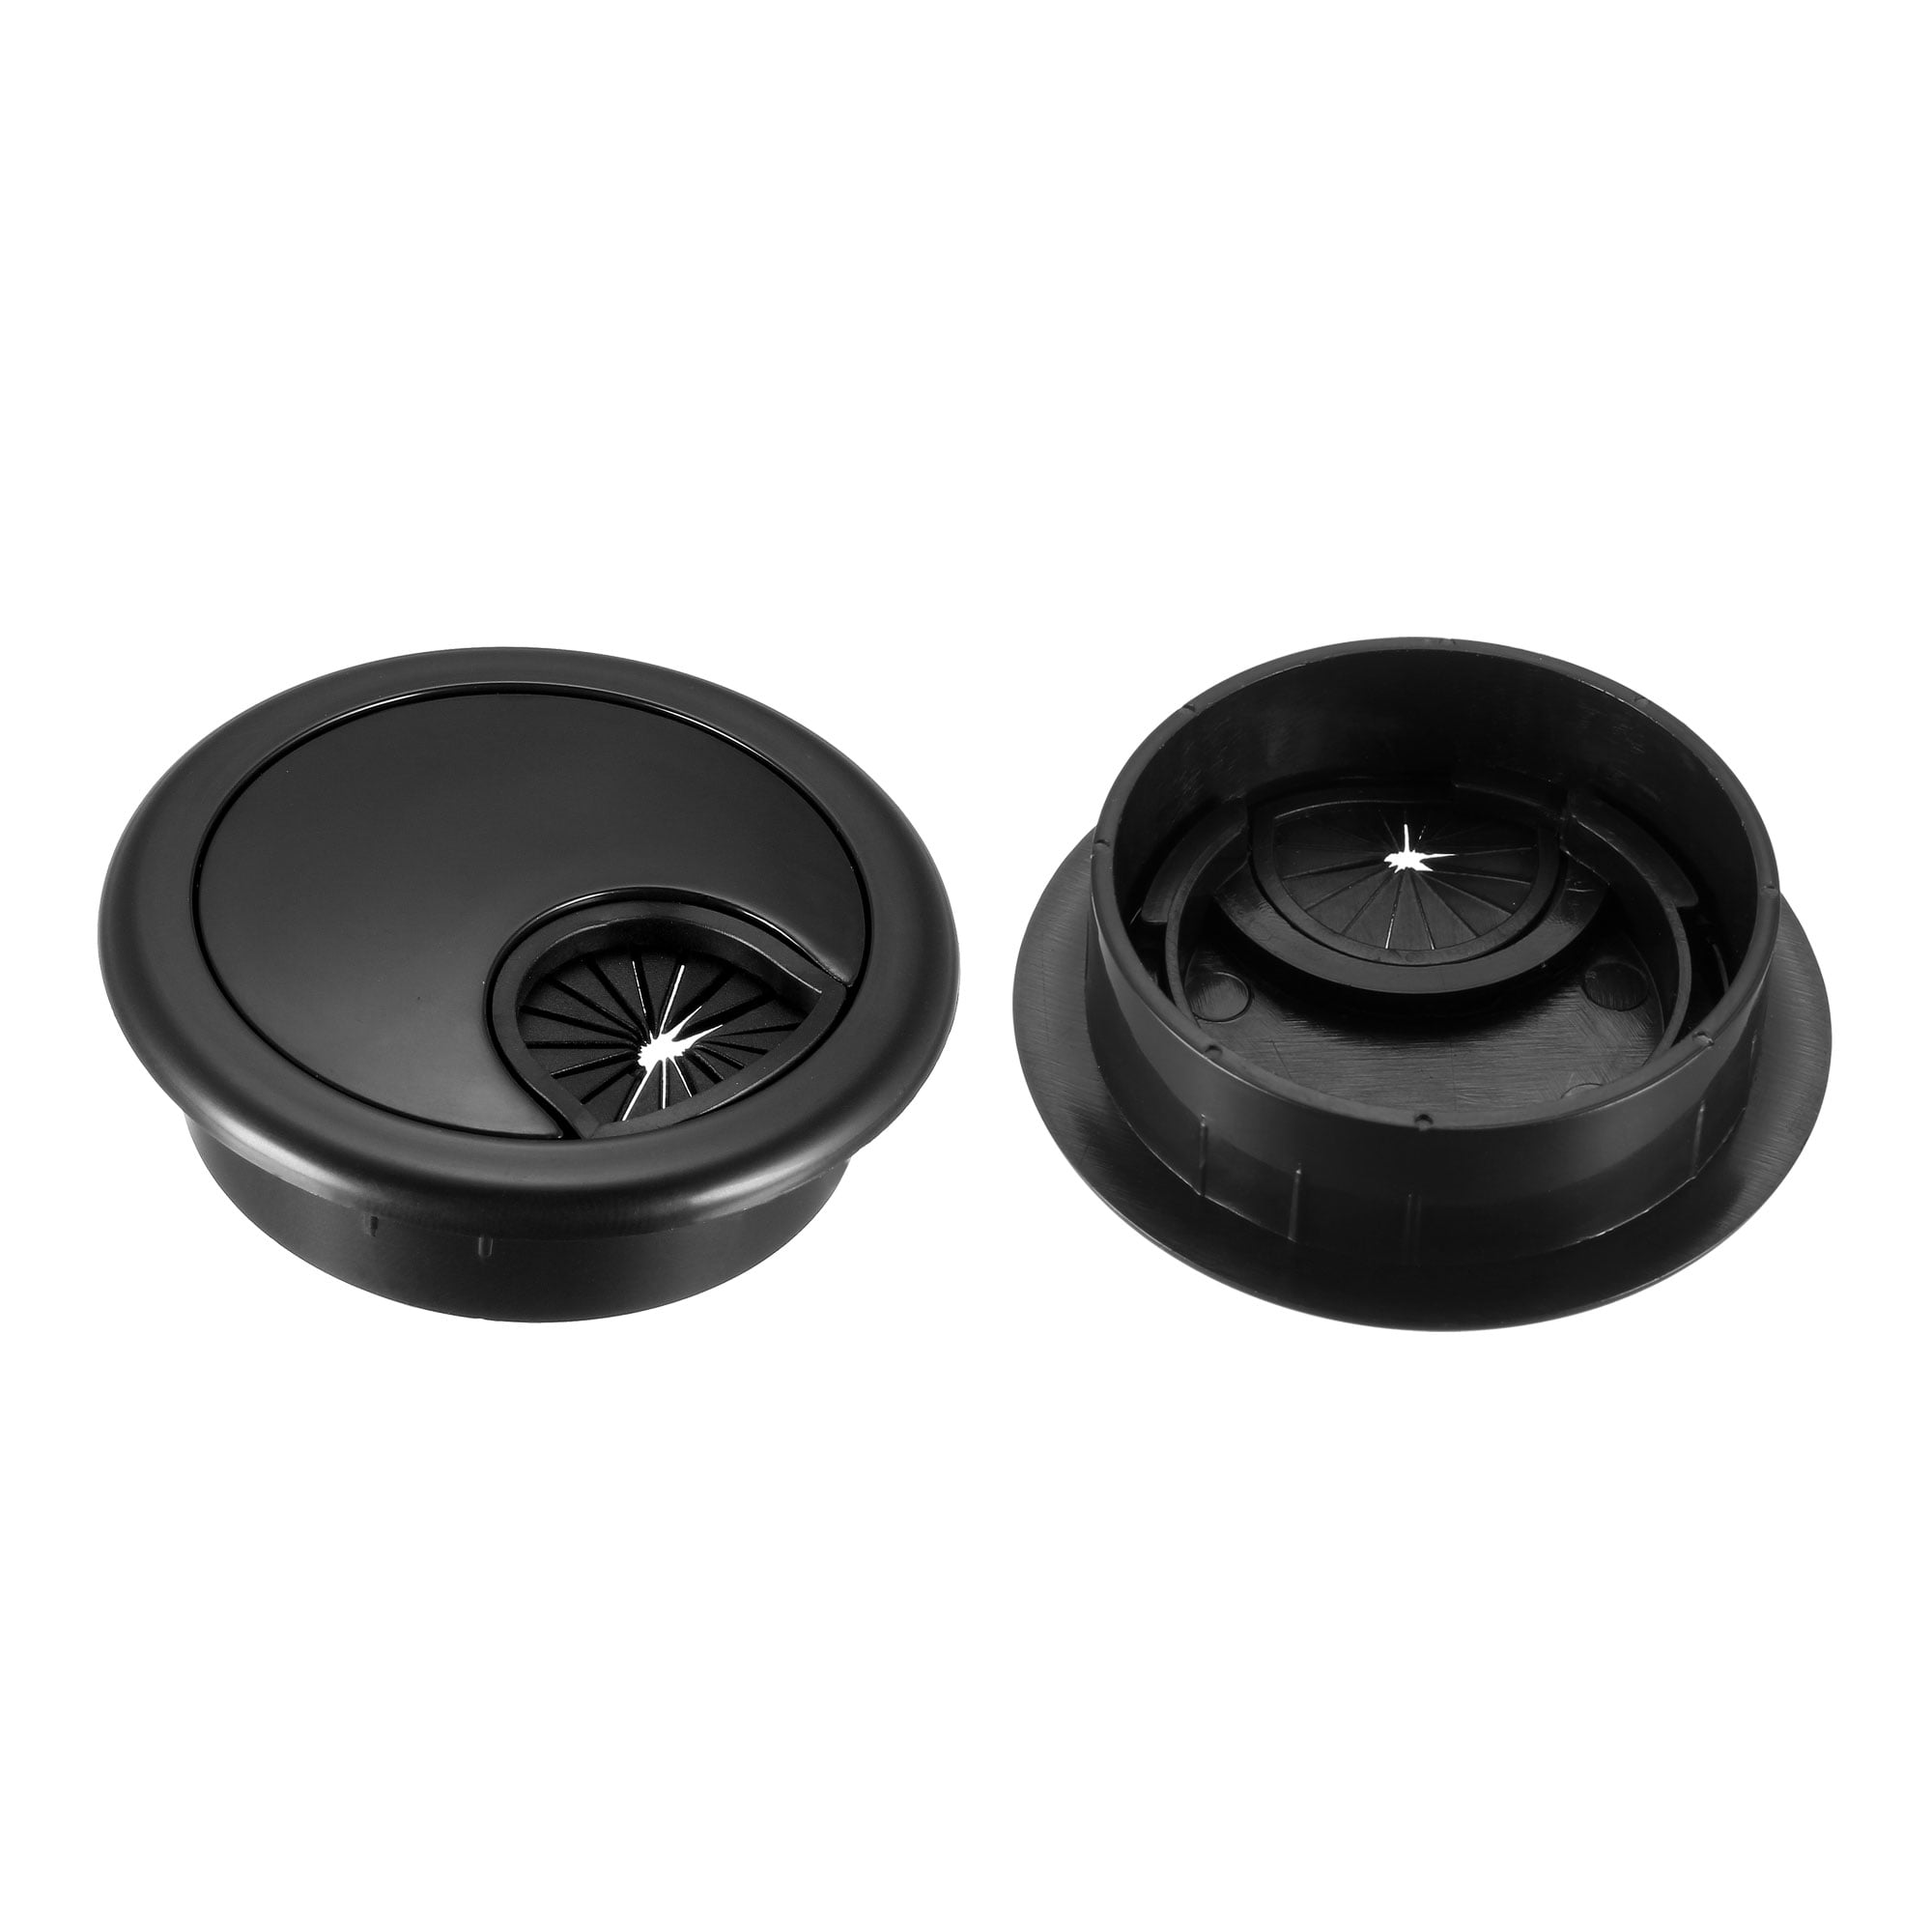 Details about   HJ Garden 2pcs 2 Inch Desk Wire Cord Cable Grommets Hole Cover for Office PC 